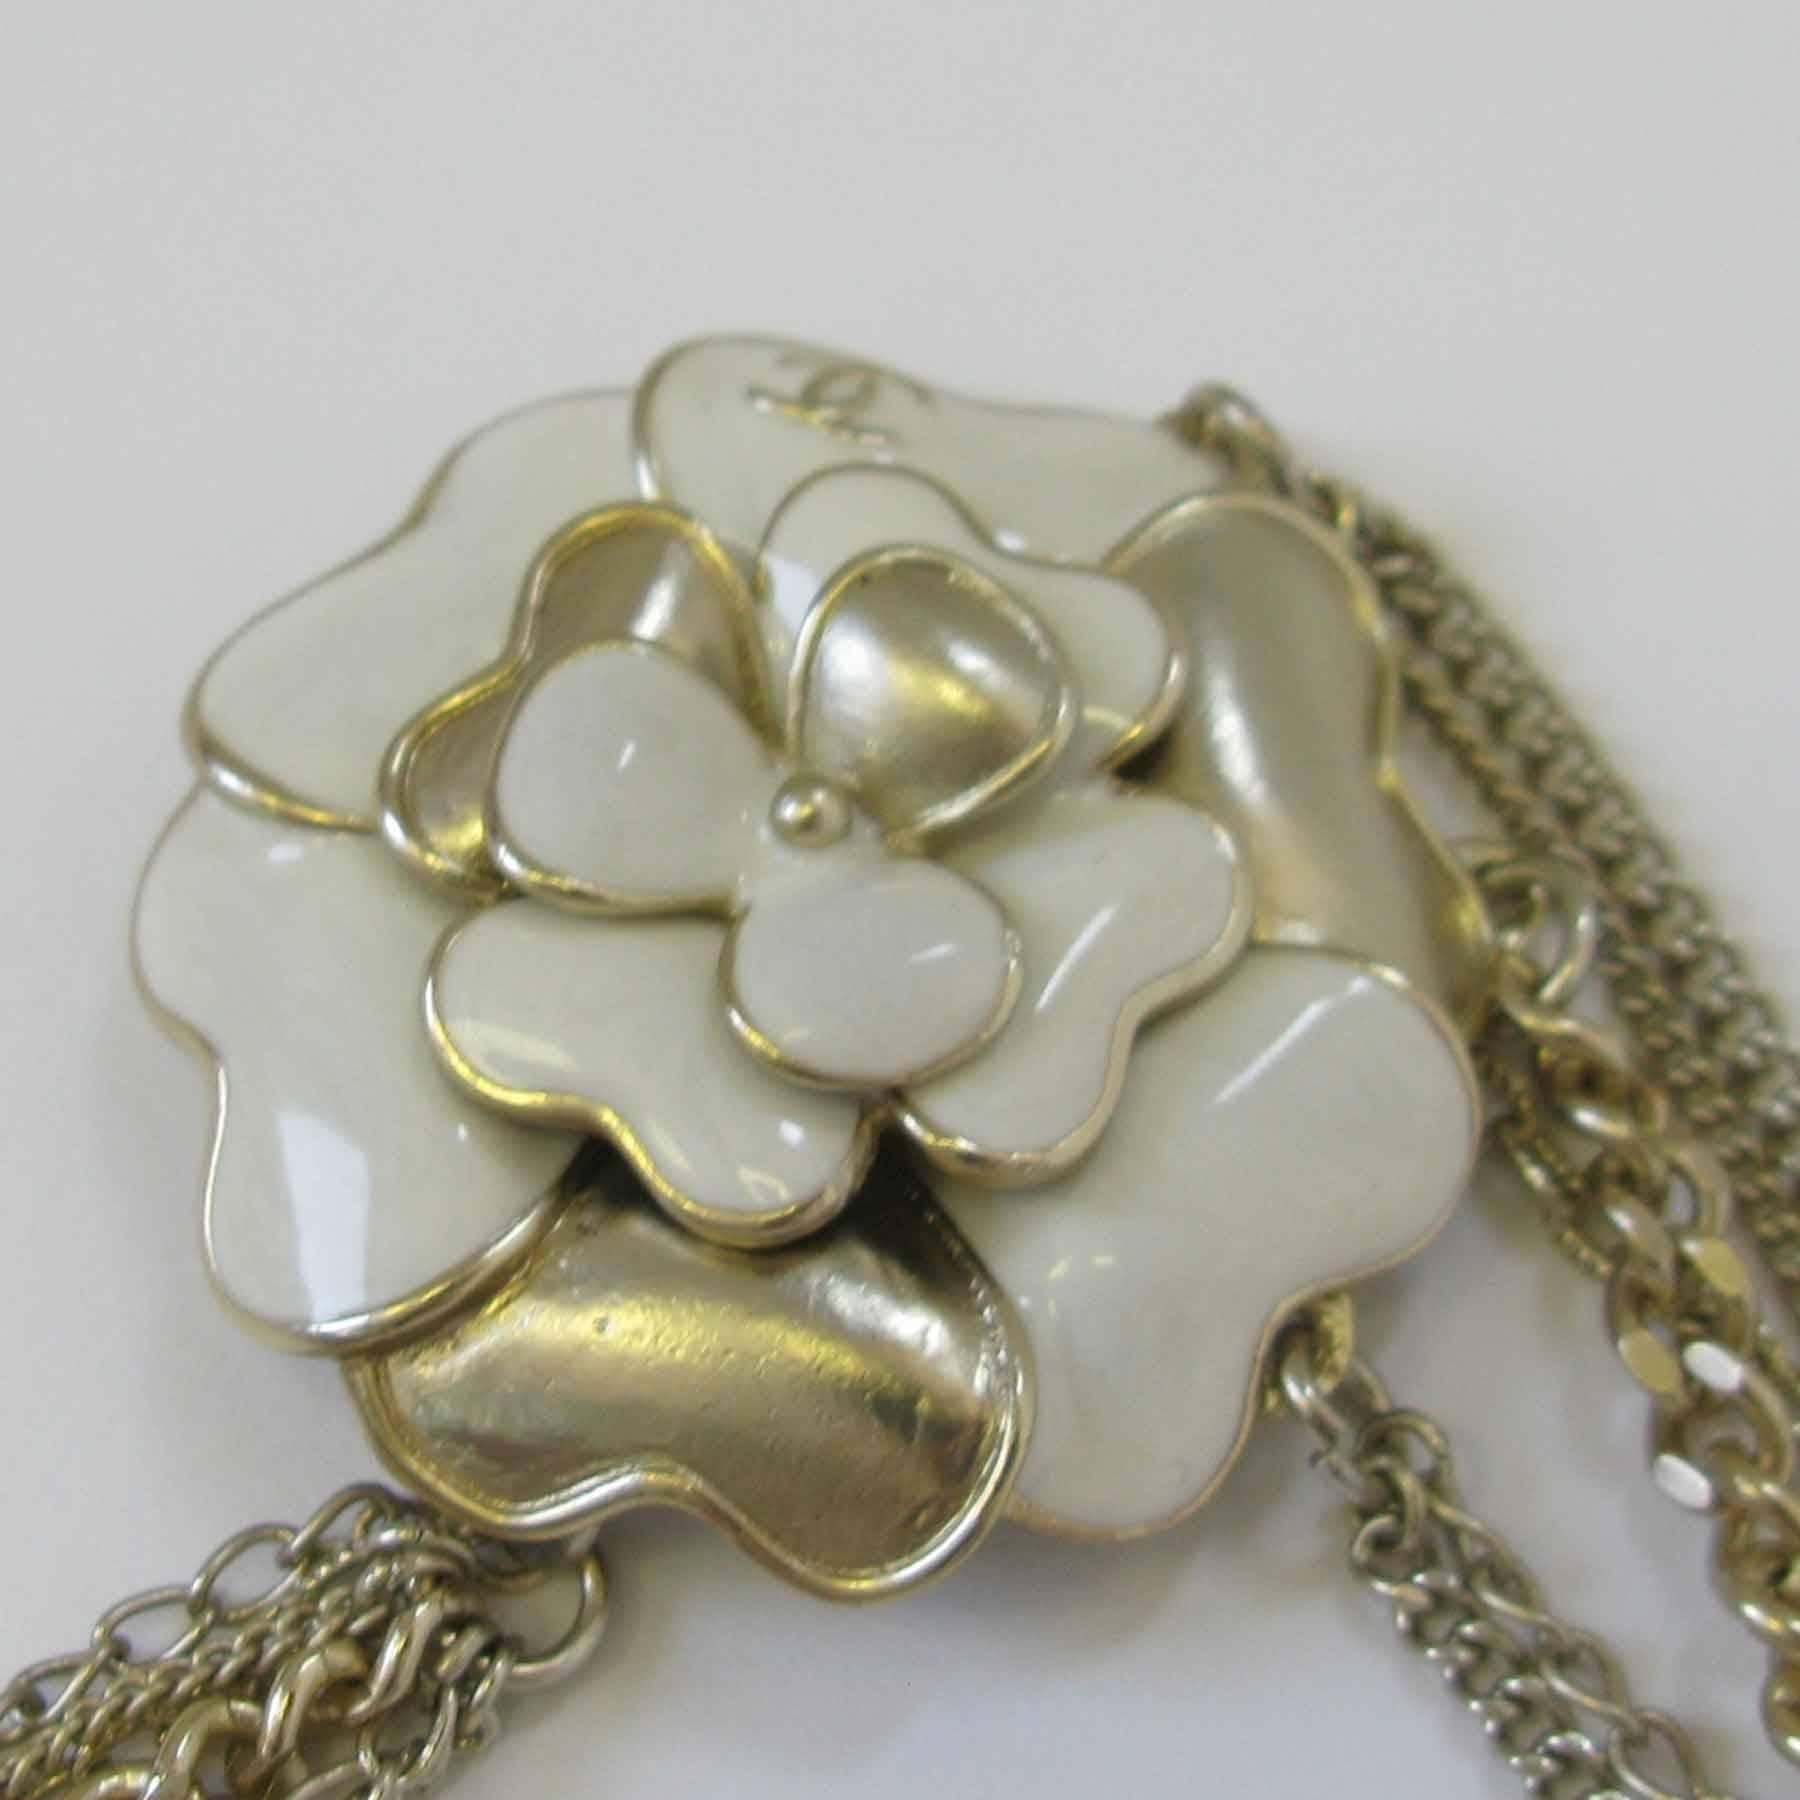 Women's CHANEL Necklace in Gilded Metal, Pearls and White and Golden Camellia